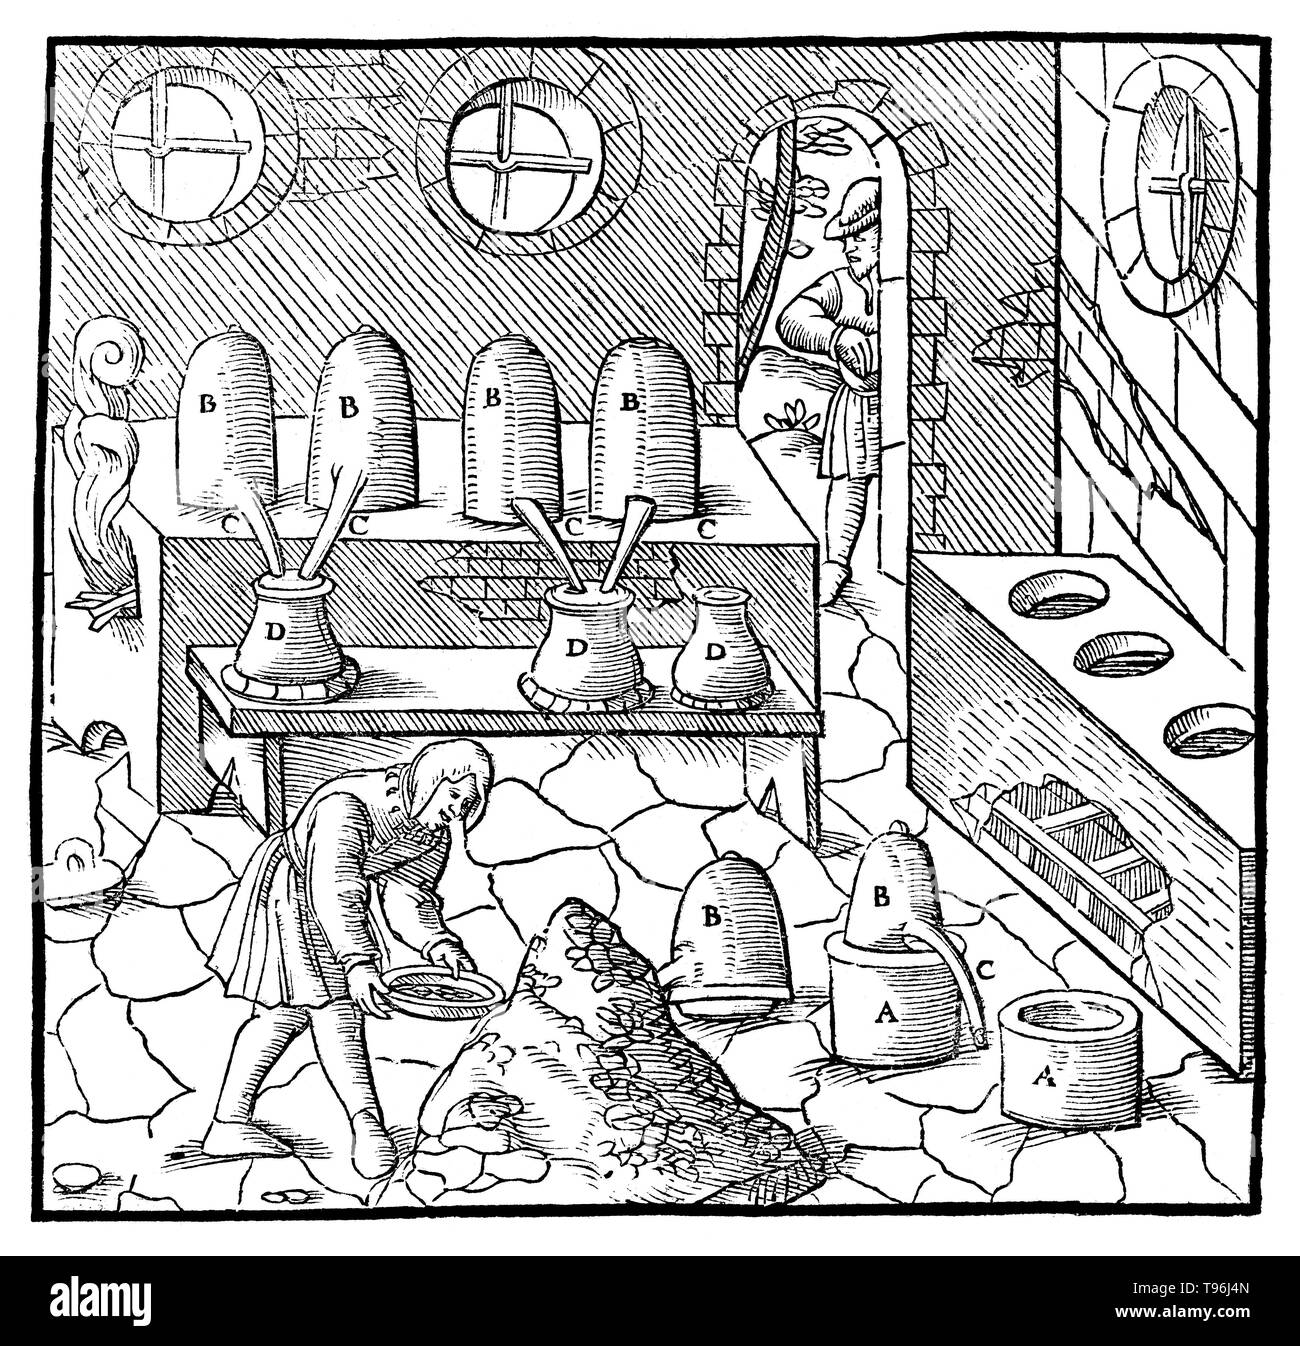 Woodcut from De Re Metallica. The distillation of quicksilver (refining). Georgius Agricola (March 24, 1494 - November 21, 1555) was a German scholar and scientist, known as ''the father of mineralogy''. In 1556 he published his book De Re Metallica, a treatise on mining and extractive metallurgy, with woodcuts illustrating processes to extract ores from the ground and metal from the ore, and the many uses of water mills in mining. Stock Photo